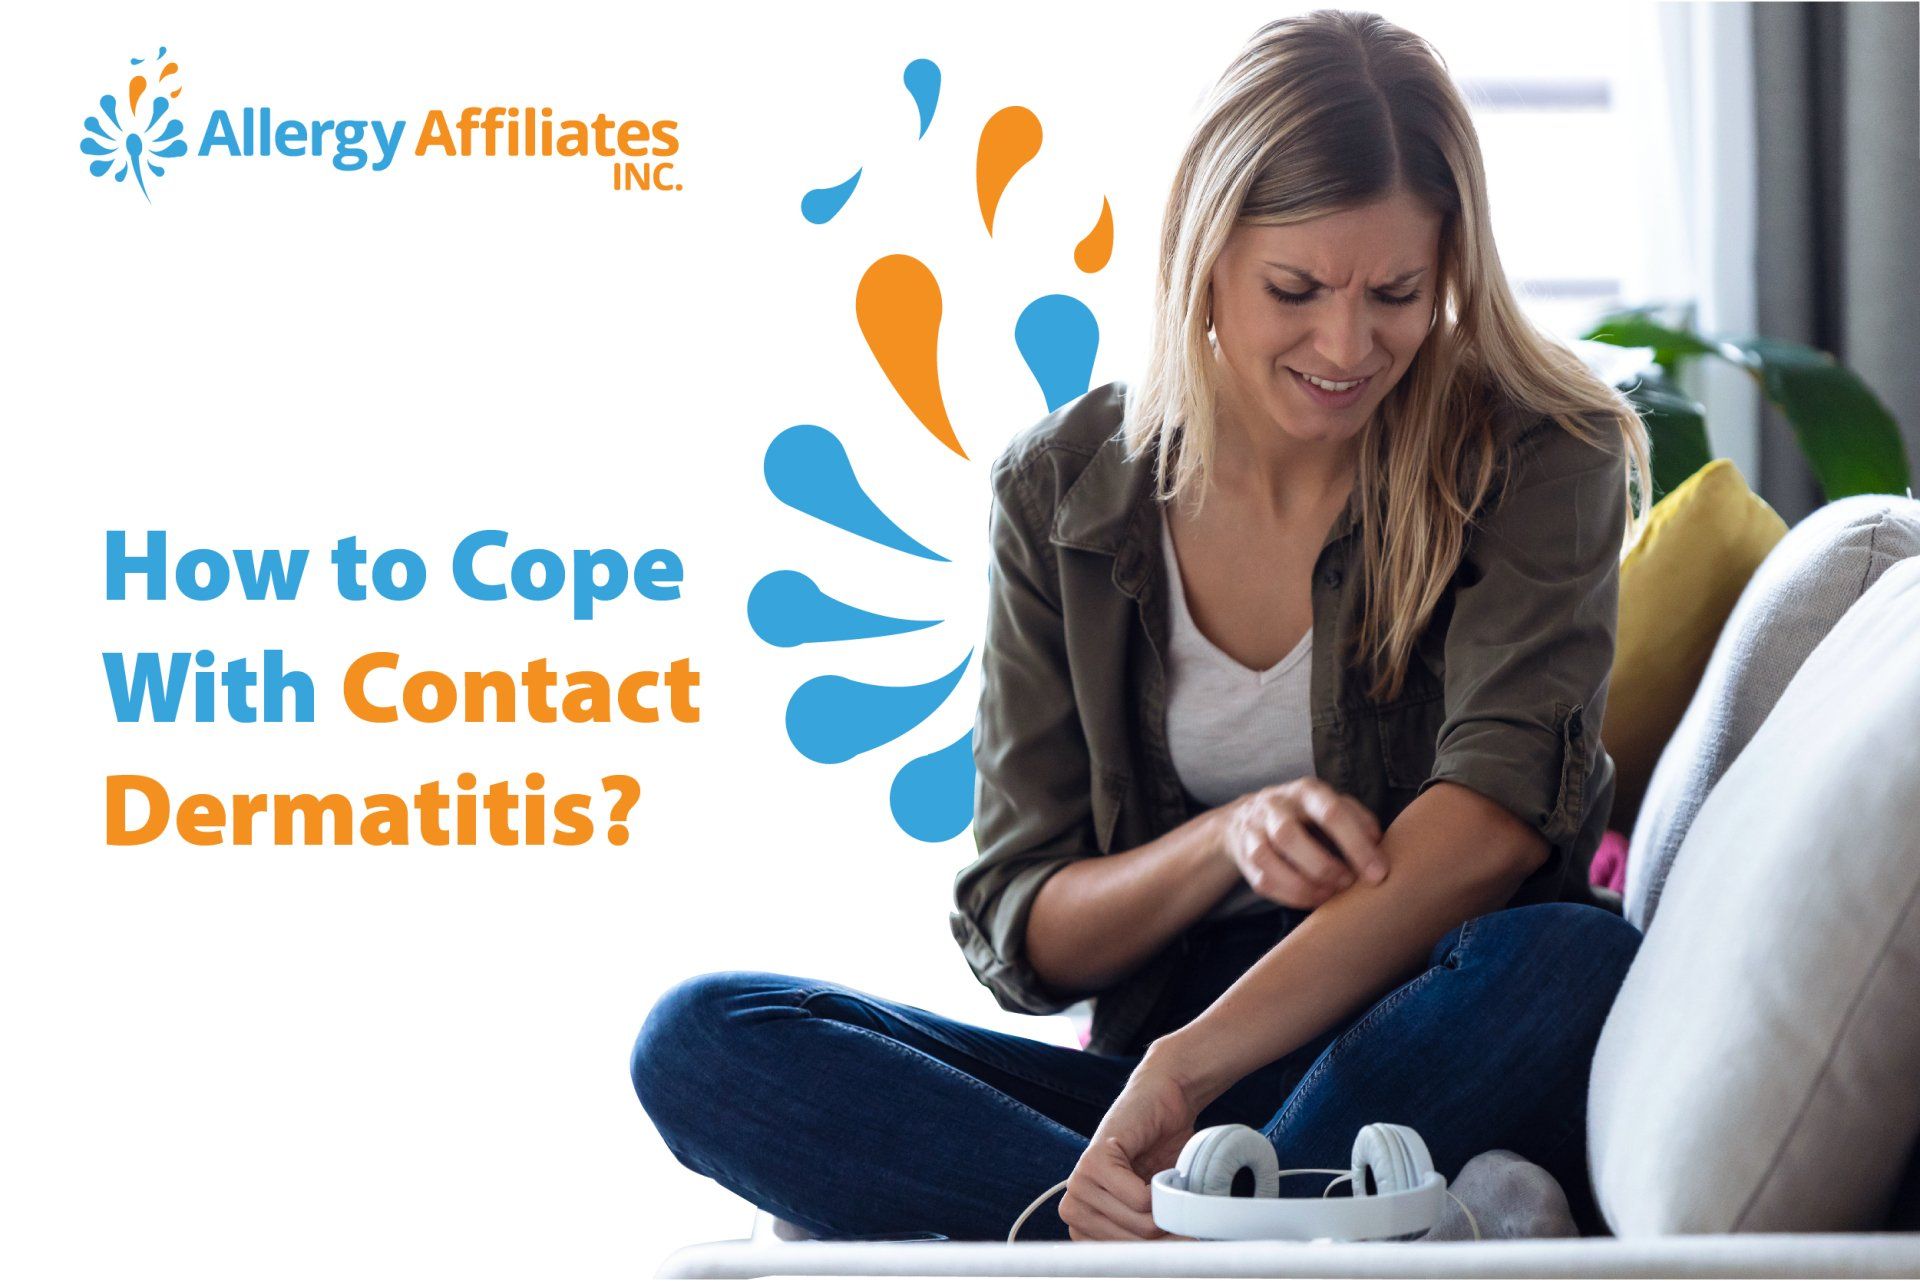 How to Cope With Contact Dermatitis